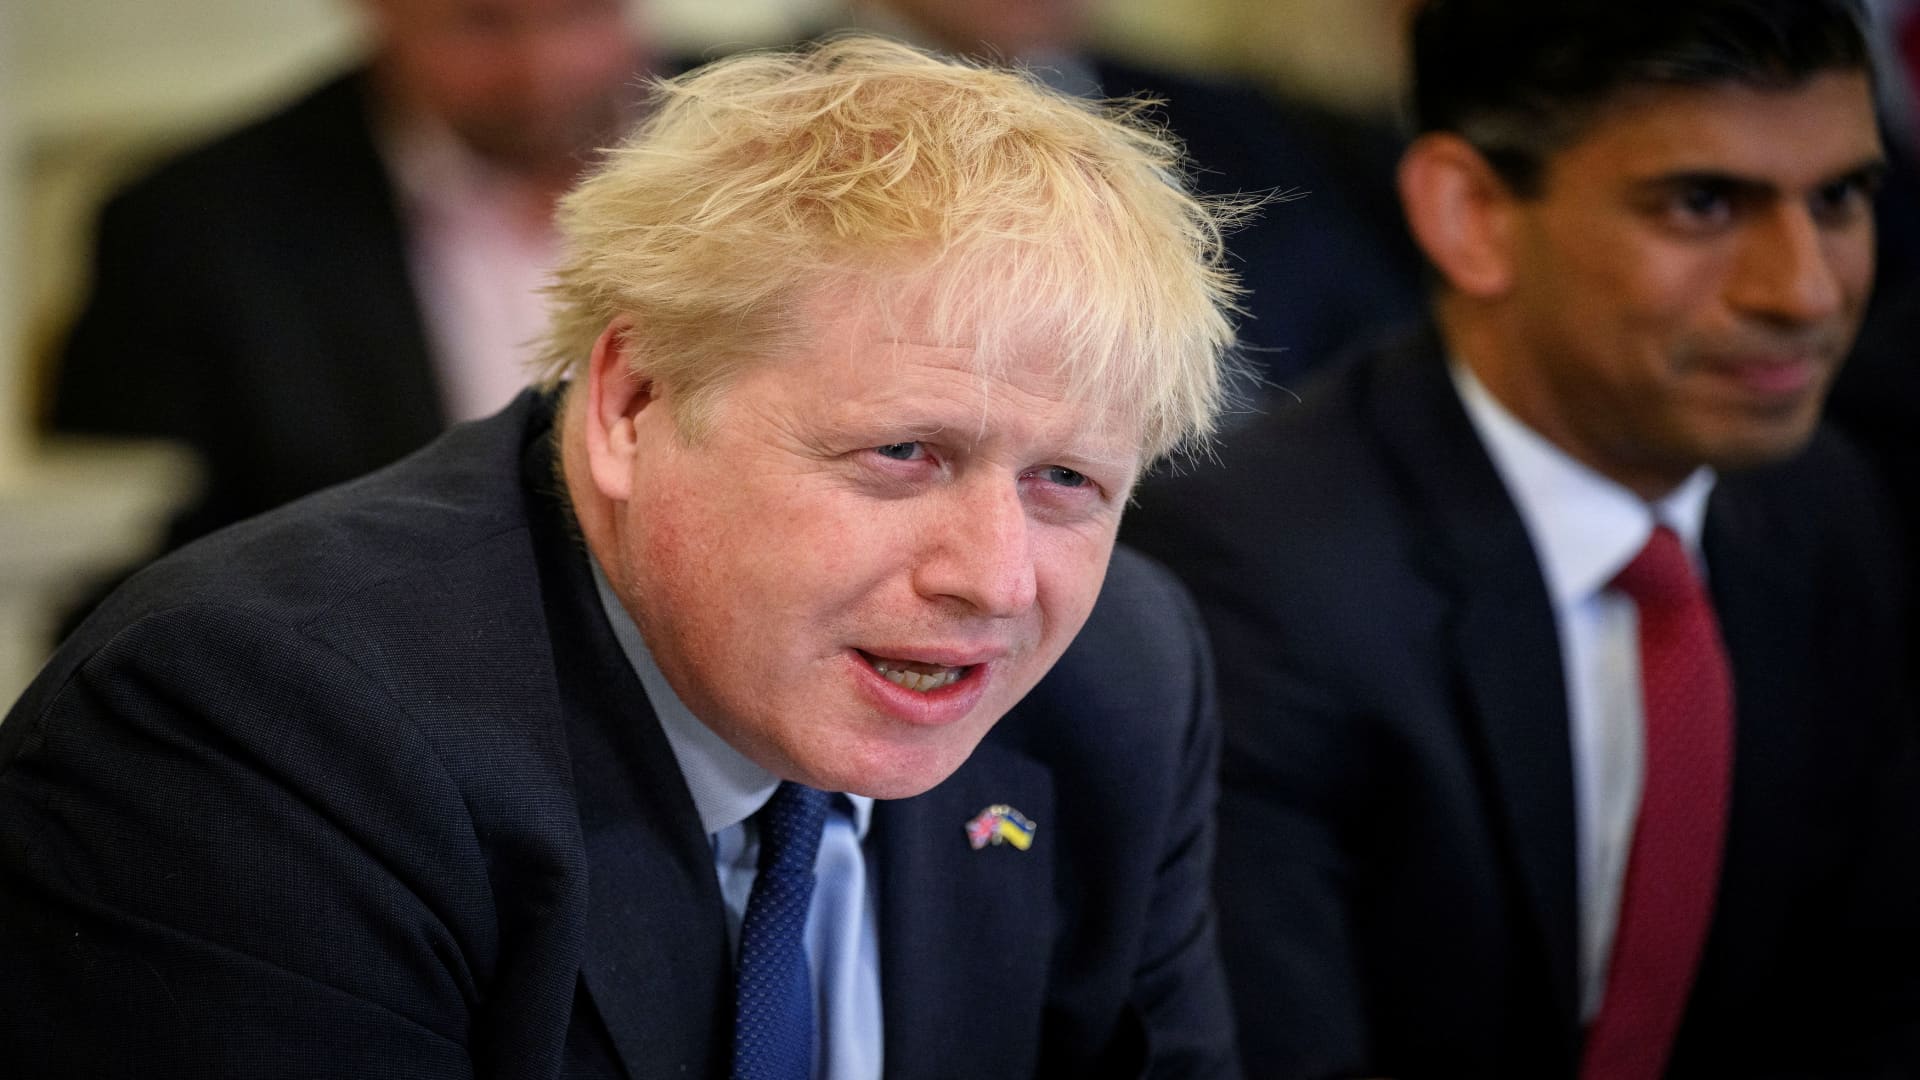 Double blow for UK's Boris Johnson as he loses two key by-elections